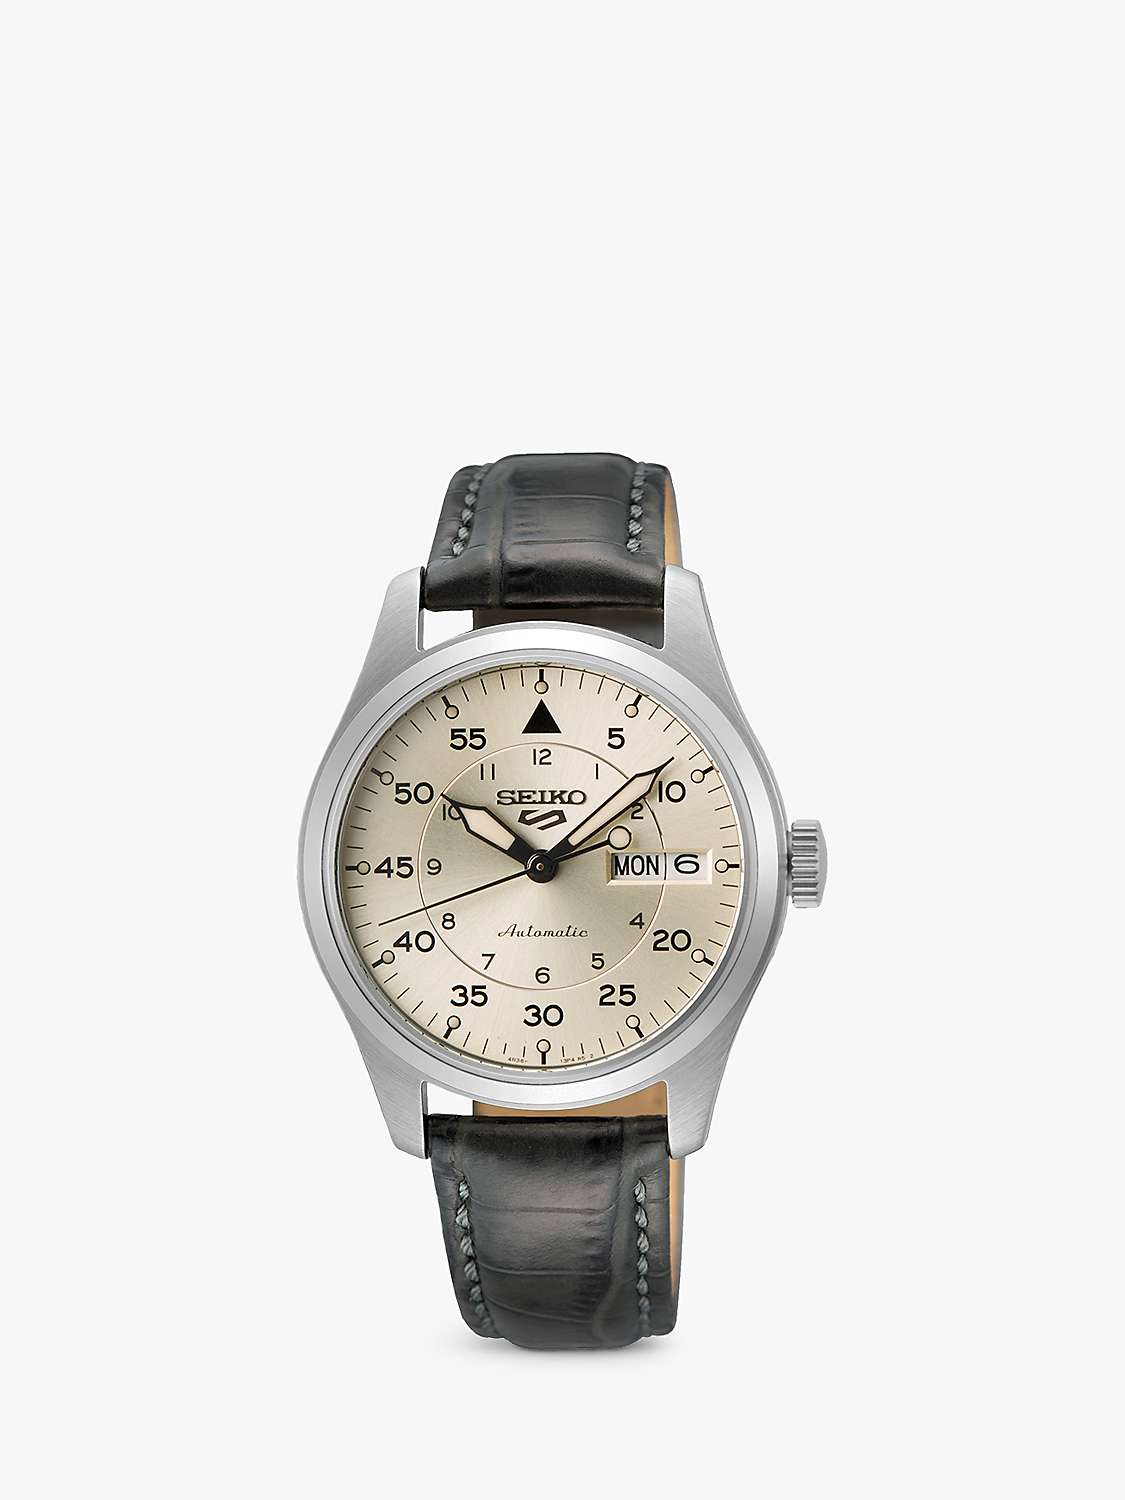 Buy Seiko SRPJ87K1 Men's 5 Field X Flieger Suits Day Date Automatic Leather Strap Watch, Grey/Gold Online at johnlewis.com